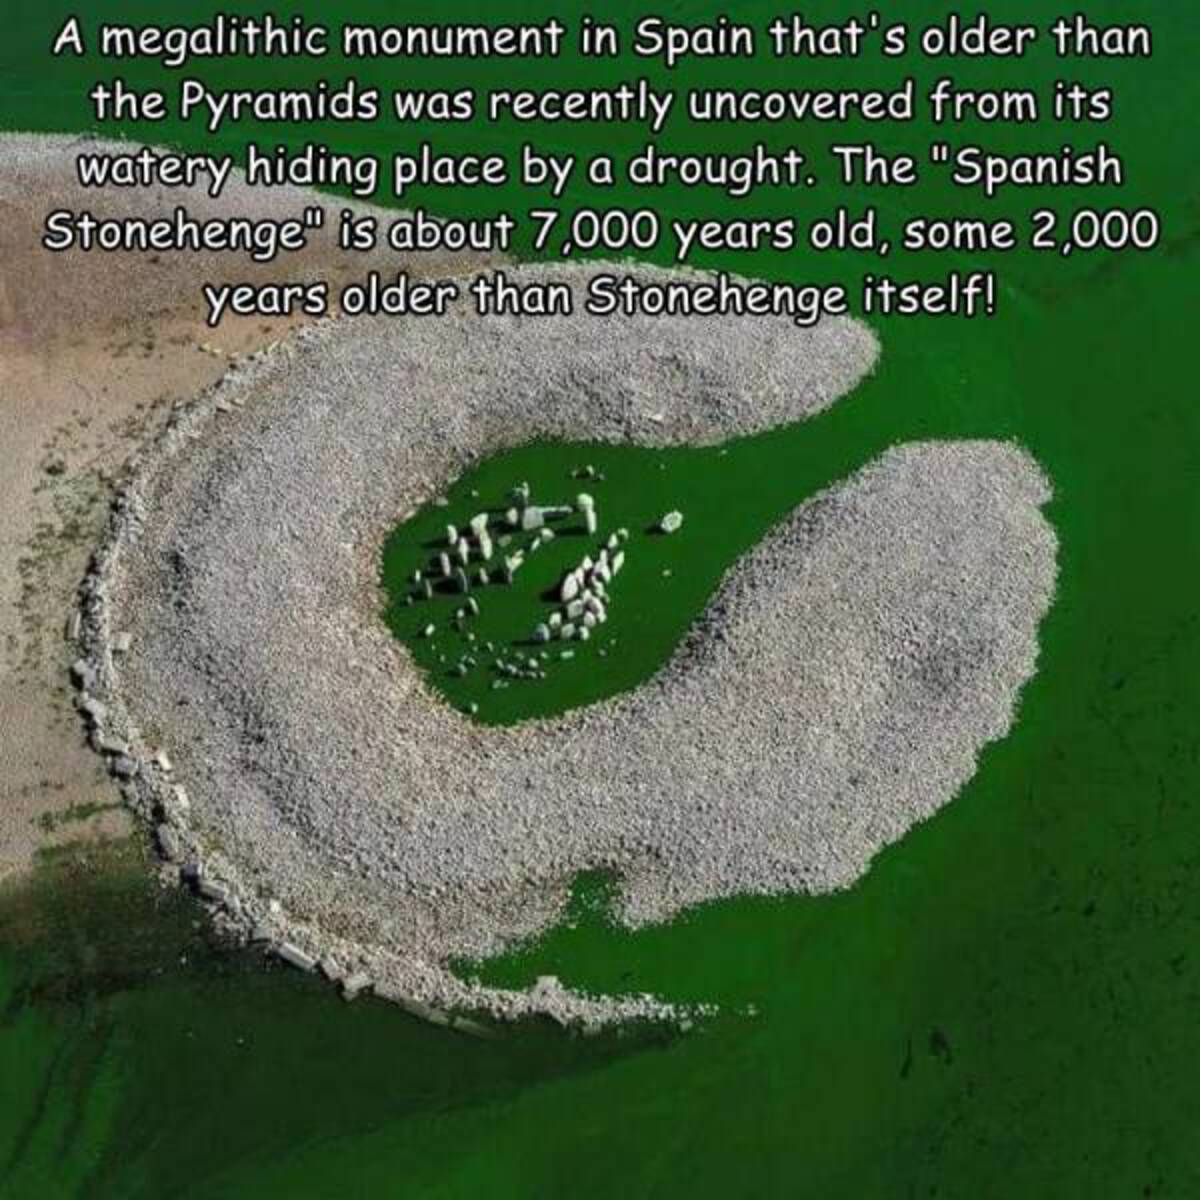 megalithic spain - A megalithic monument in Spain that's older than the Pyramids was recently uncovered from its watery hiding place by a drought. The "Spanish Stonehenge is about 7,000 years old, some 2,000 years older than Stonehenge itself!